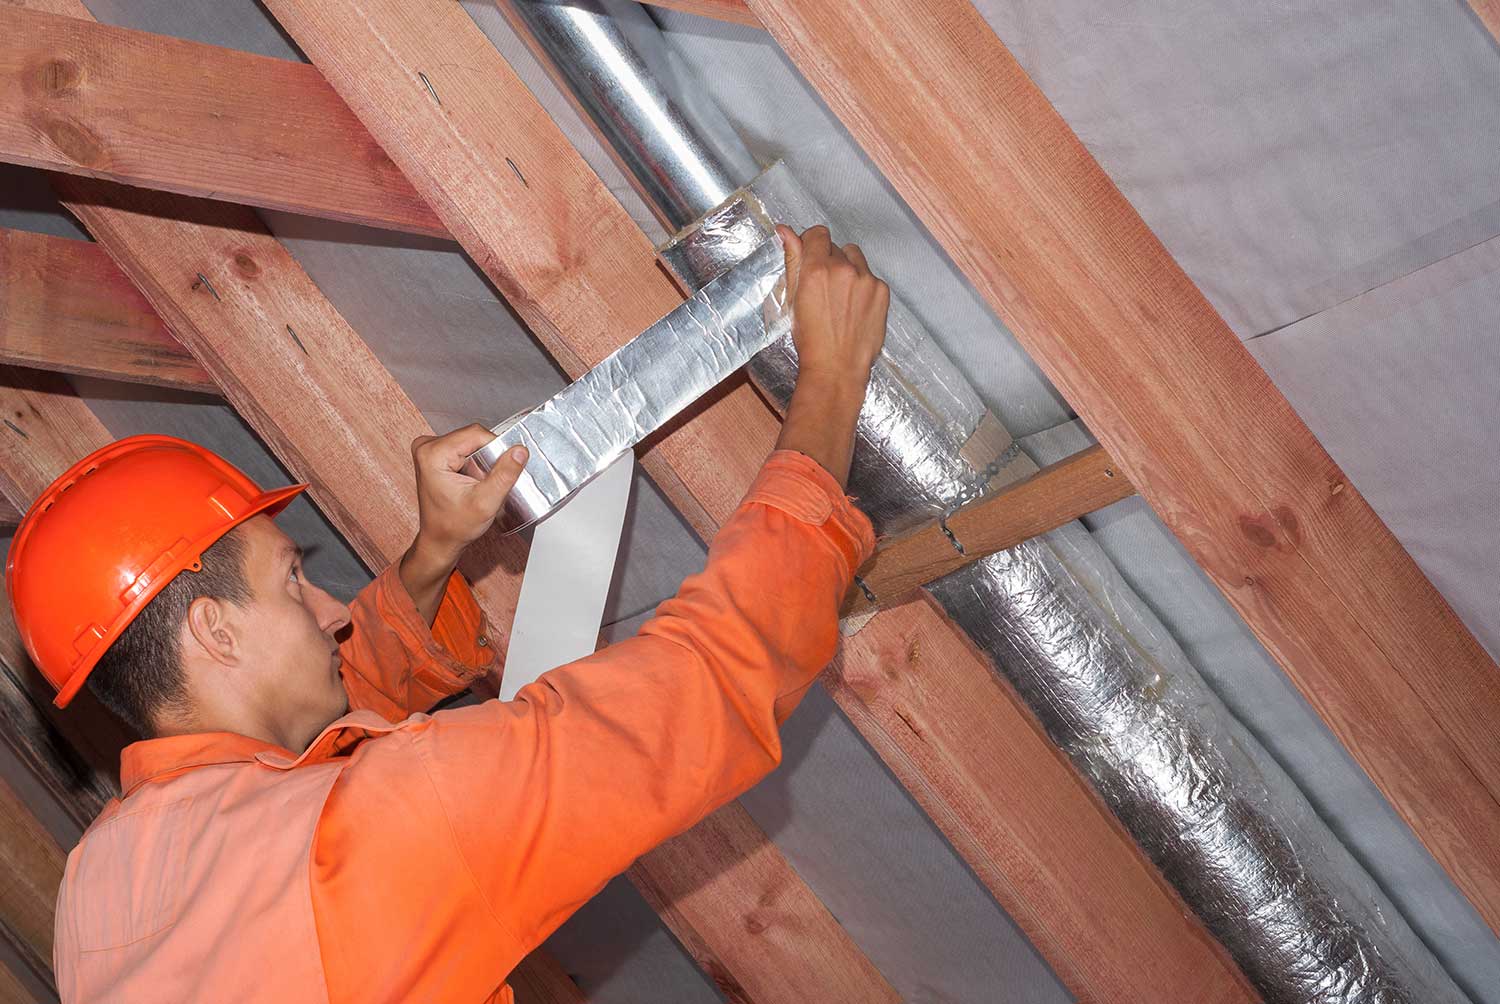 Cleaning the HVAC duct system